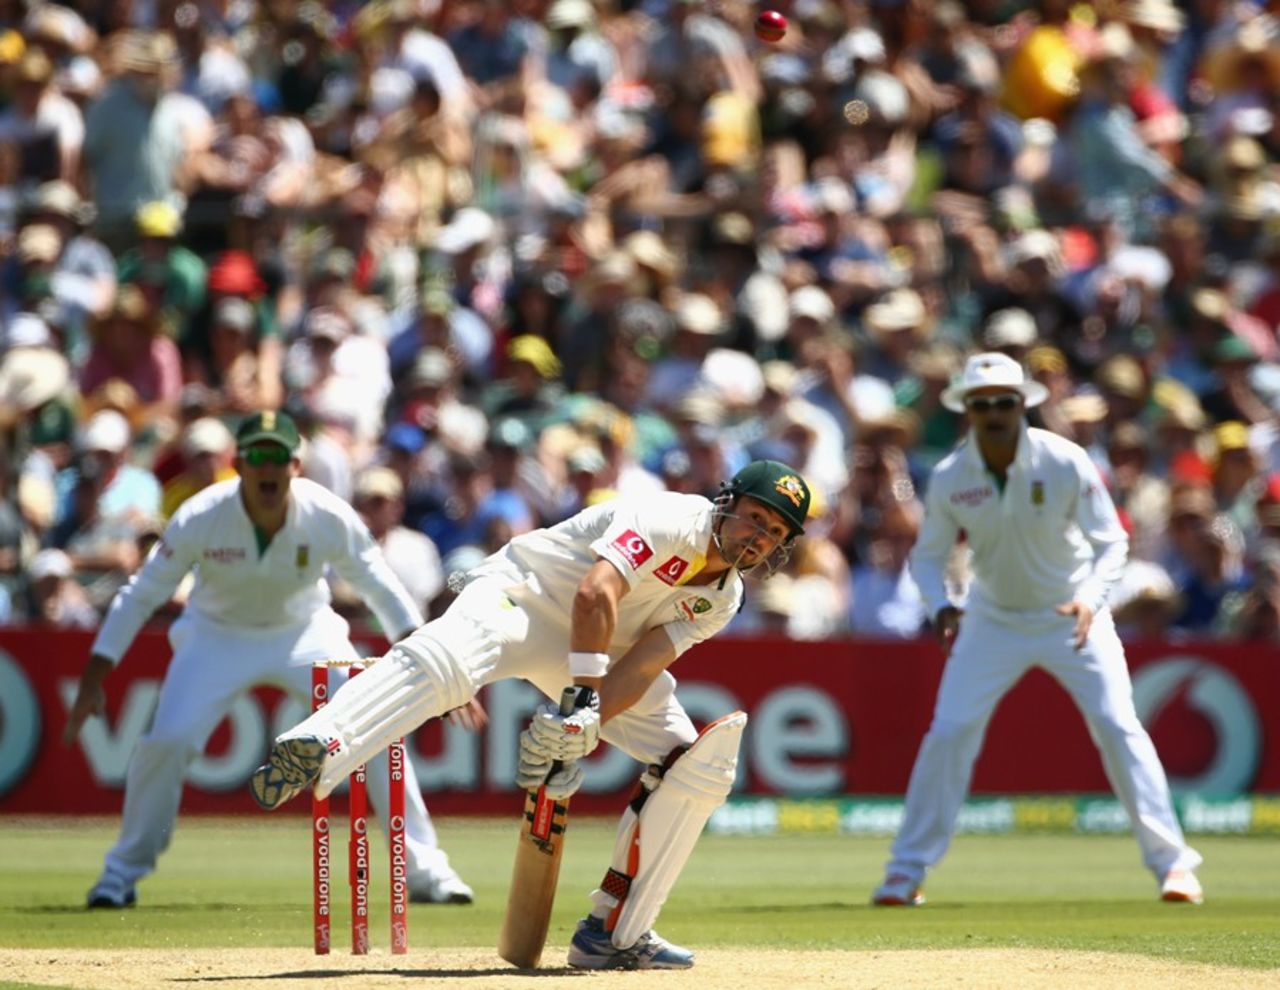 Ed Cowan jams down on a yorker to be caught and bowled, Australia v South Africa, 2nd Test, Adelaide, 1st day, November 22, 2012